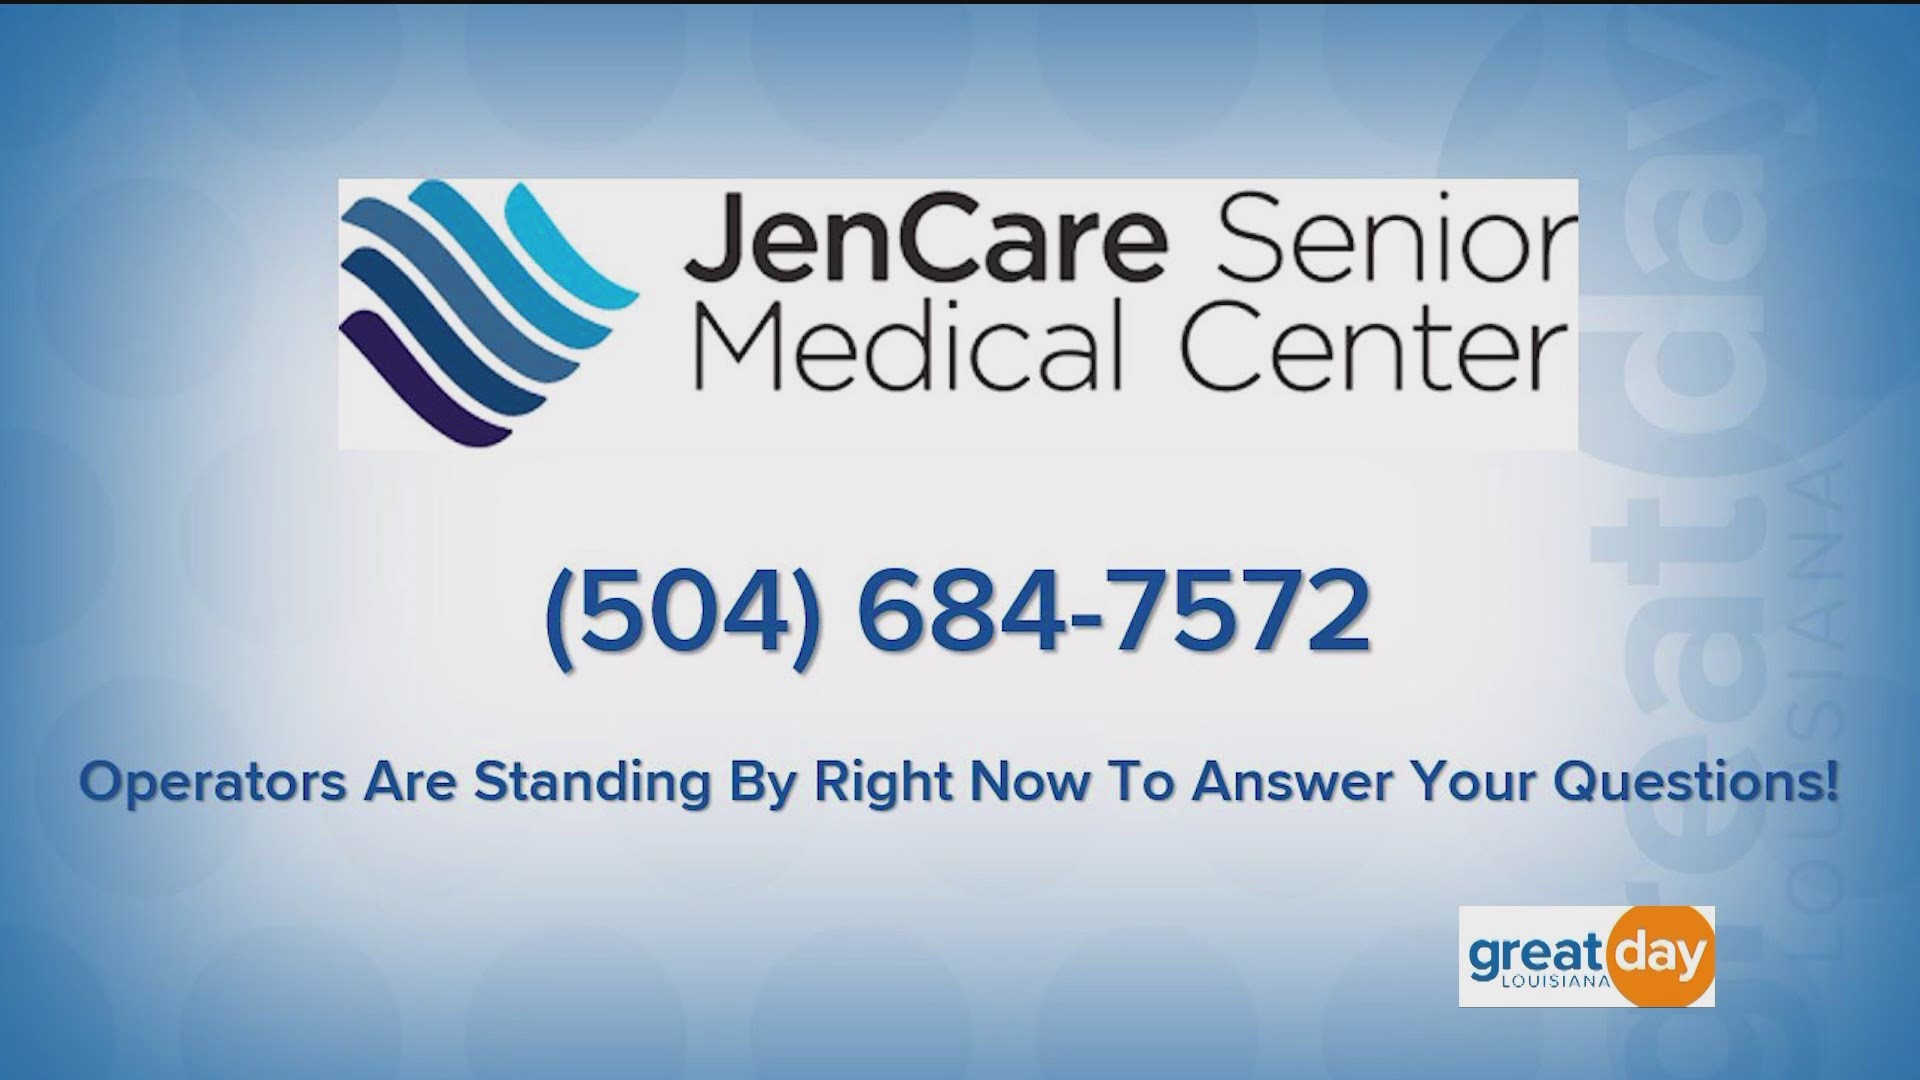 To have your questions answered, call JenCare at 504-684-7572. You can also visit, jencaremed.com